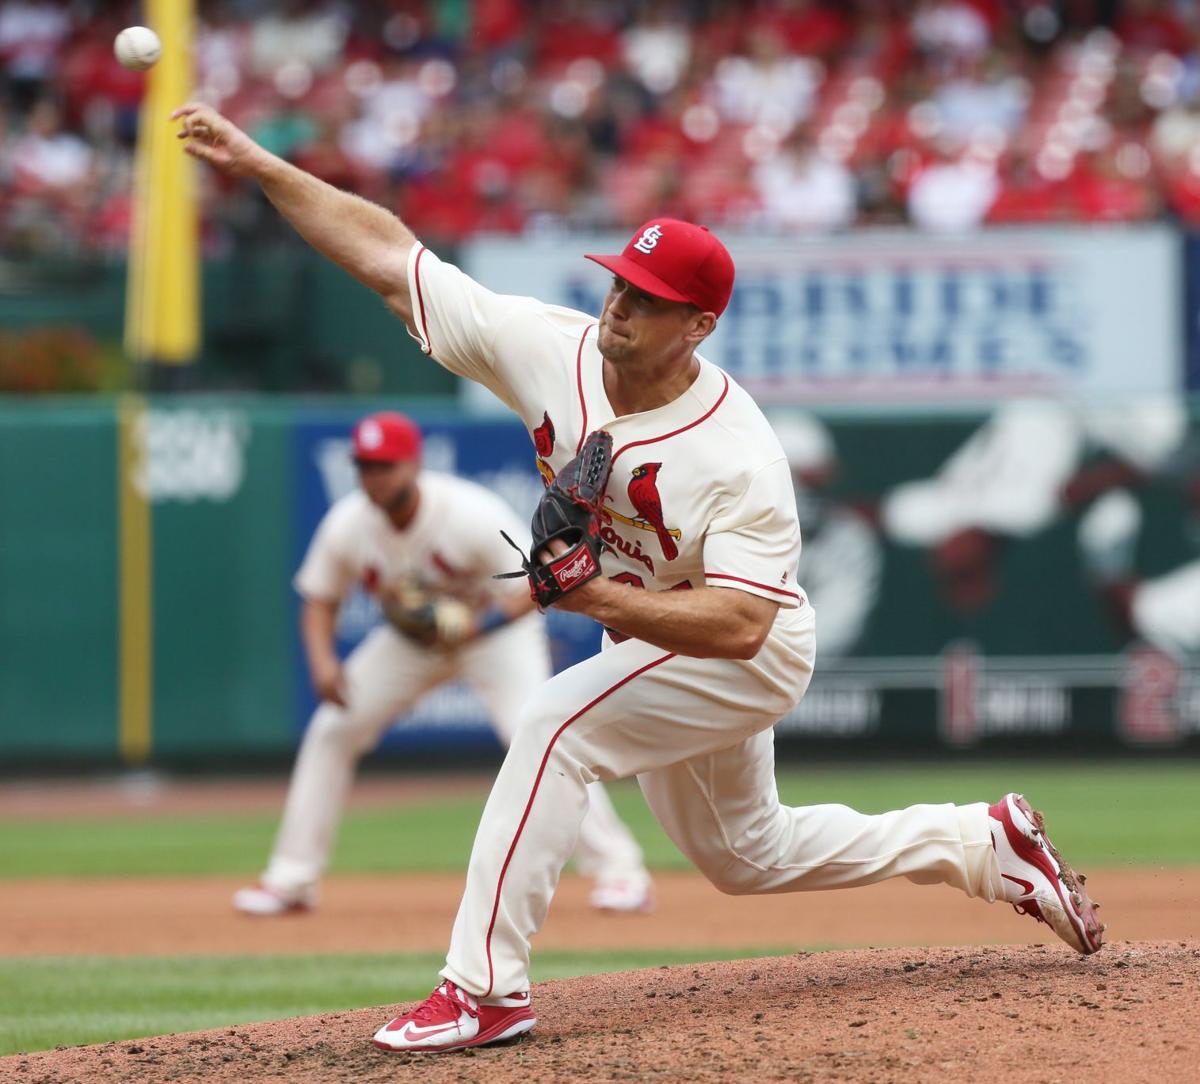 Rosenthal comes up big for Cardinals | St. Louis Cardinals | www.waterandnature.org